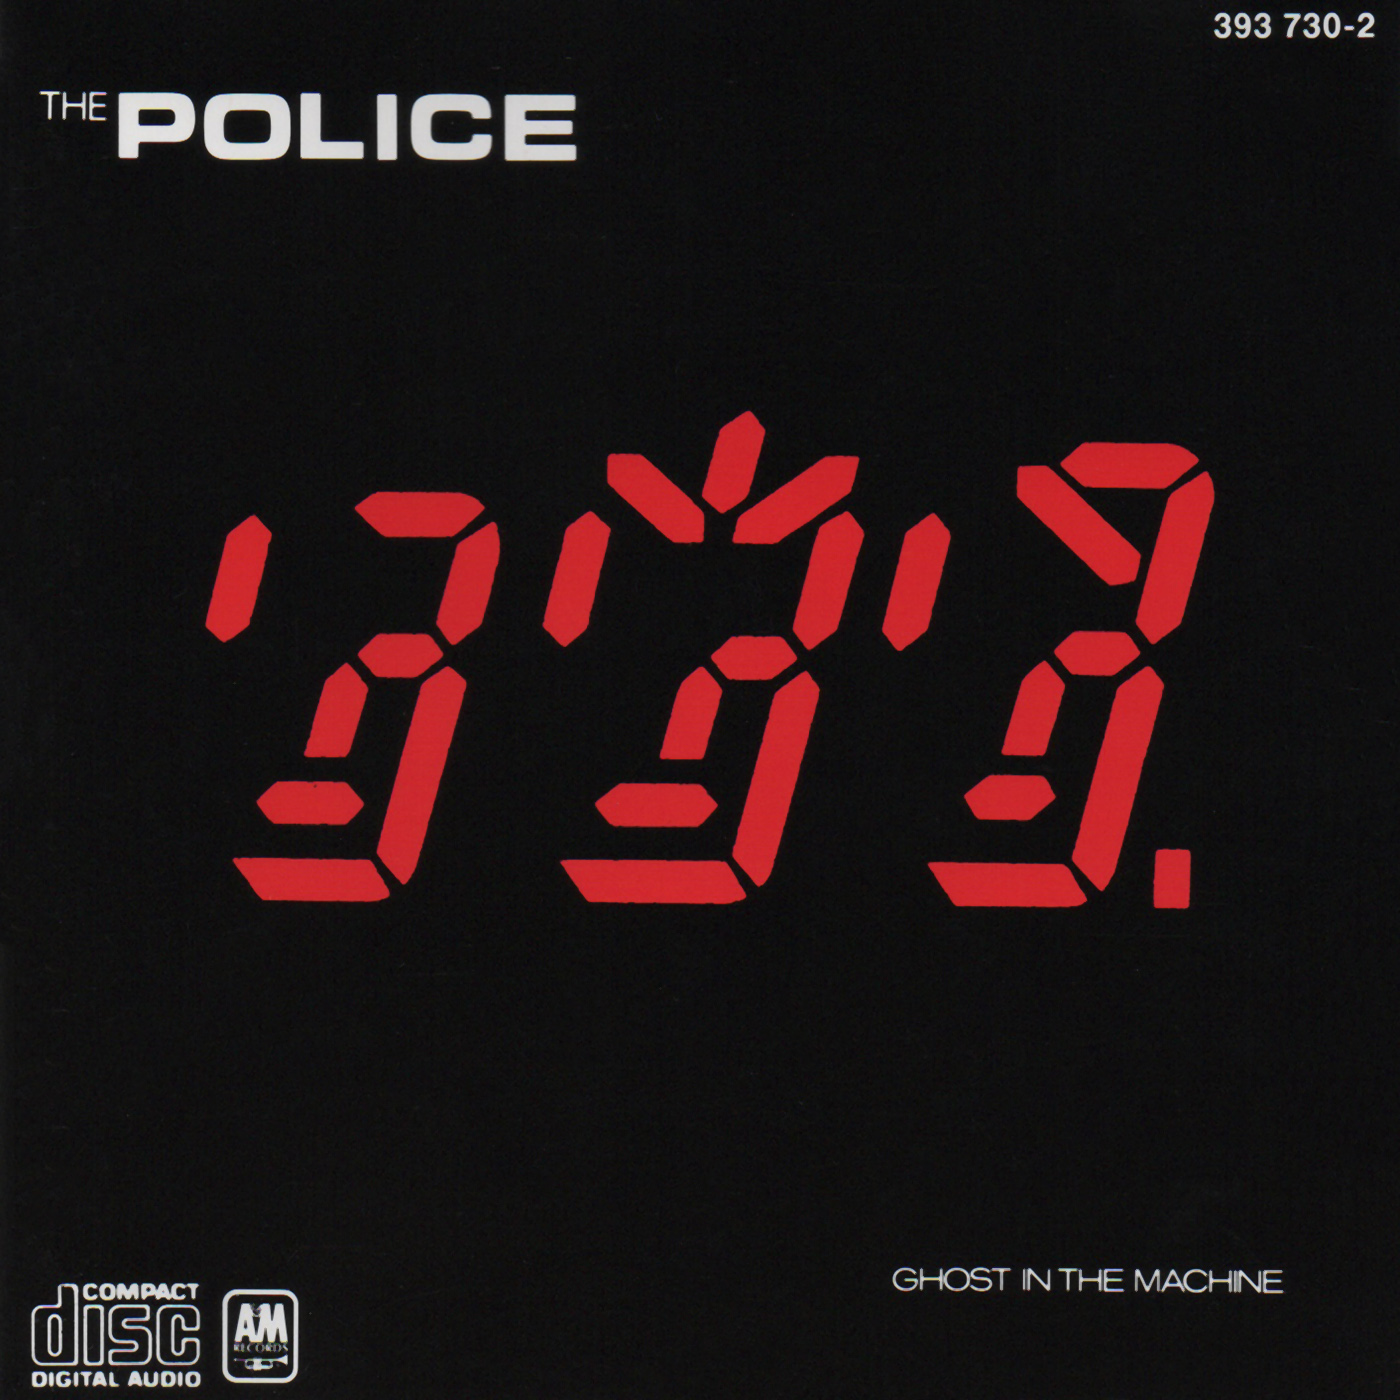 The Police - 1981 - Ghost in the Machine [393 730-2]